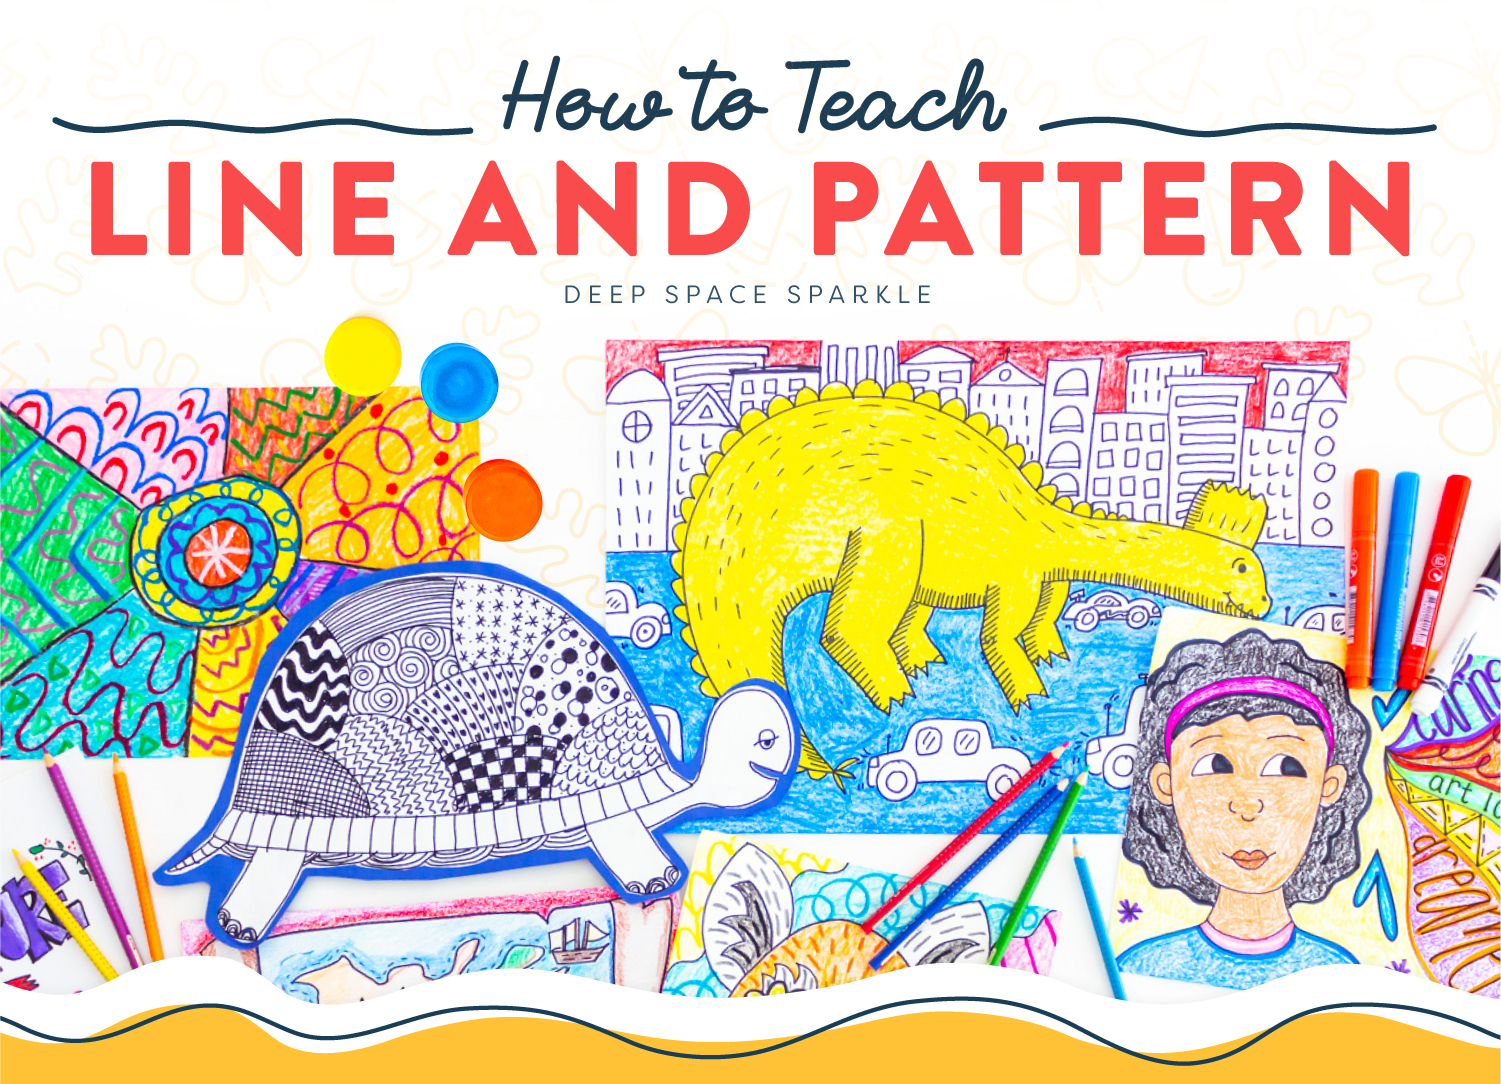 How to Teach Line and Pattern to children in elementary school